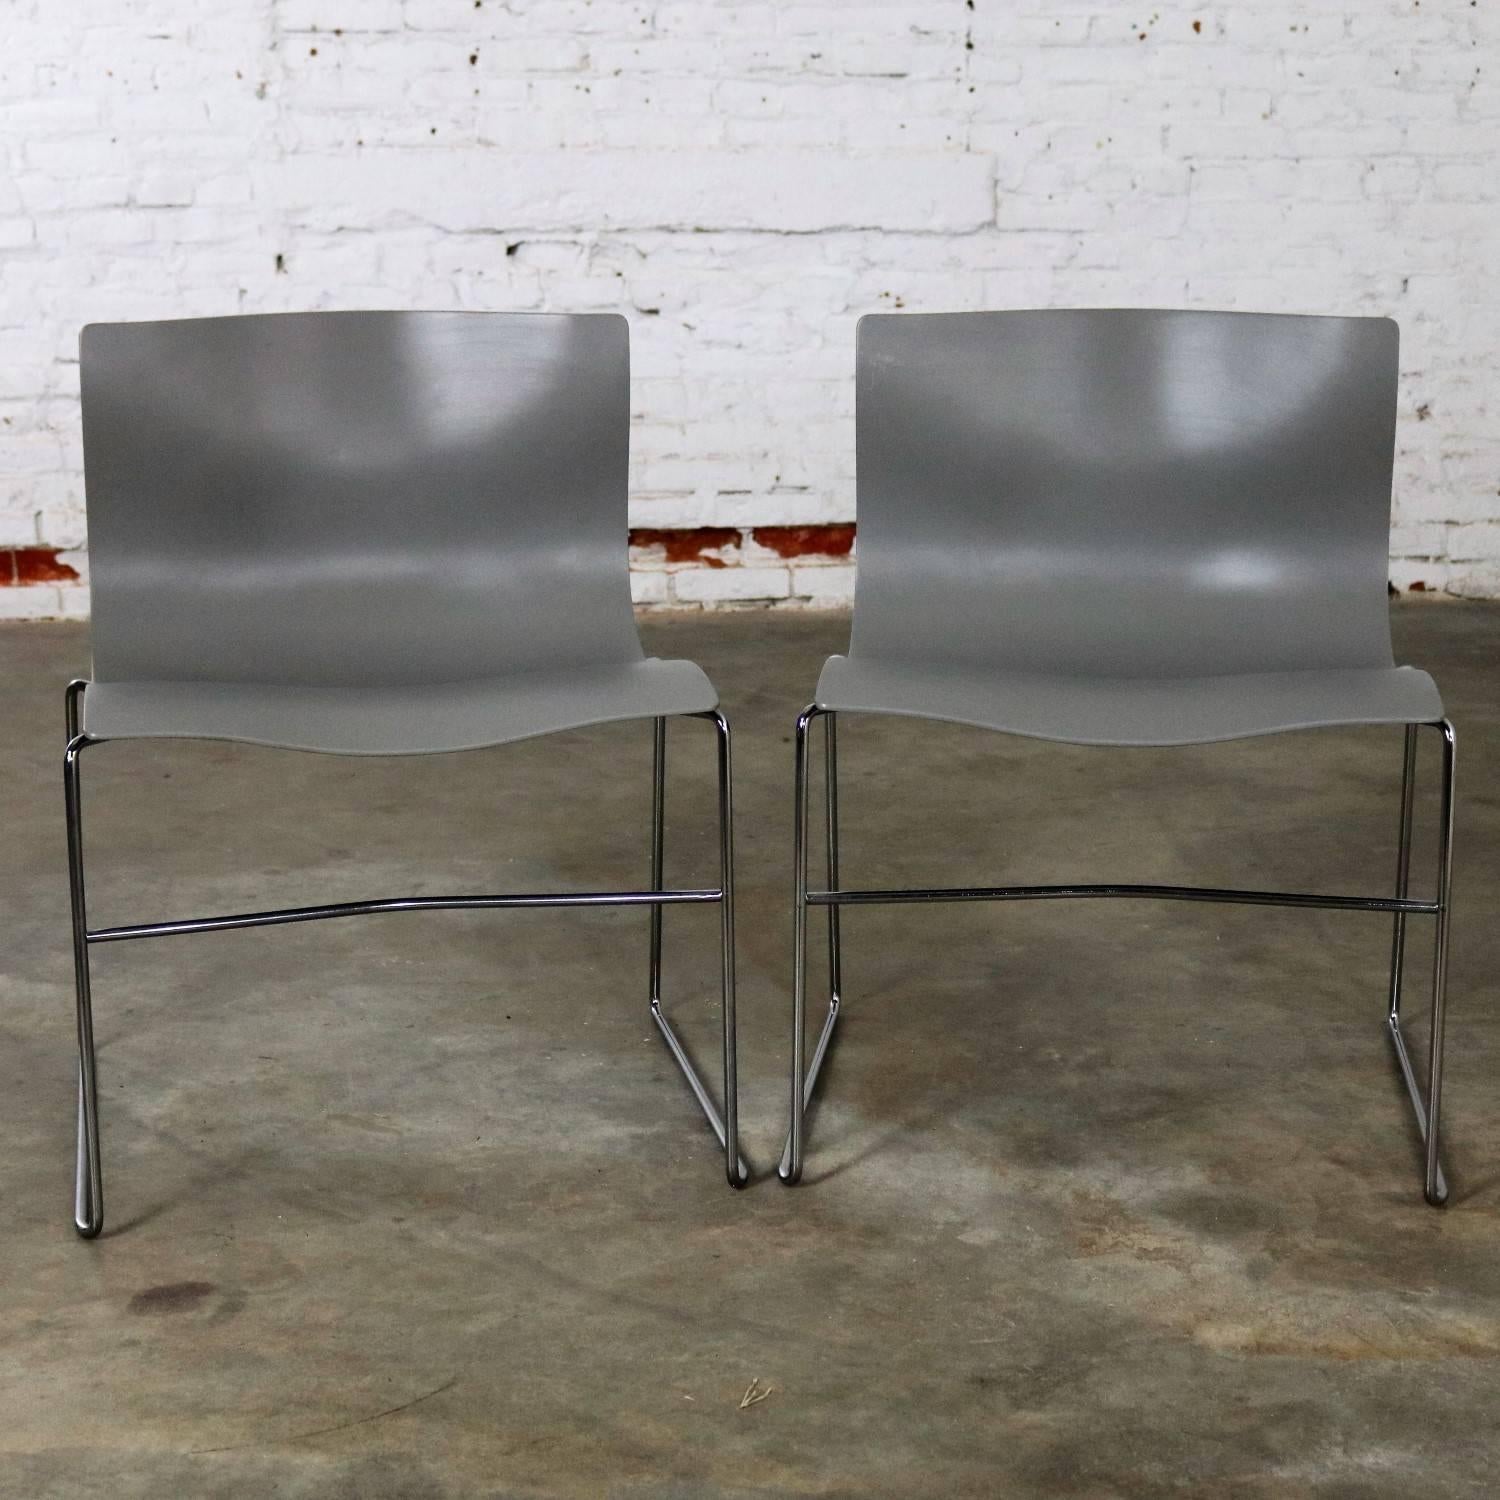 Handsome pair of Knoll handkerchief side chairs in gray with chromed steel wire base. This chair was designed by the husband and wife team of Massimo and Lella Vignelli for Knoll, circa 1985. They are in excellent condition and what I would consider